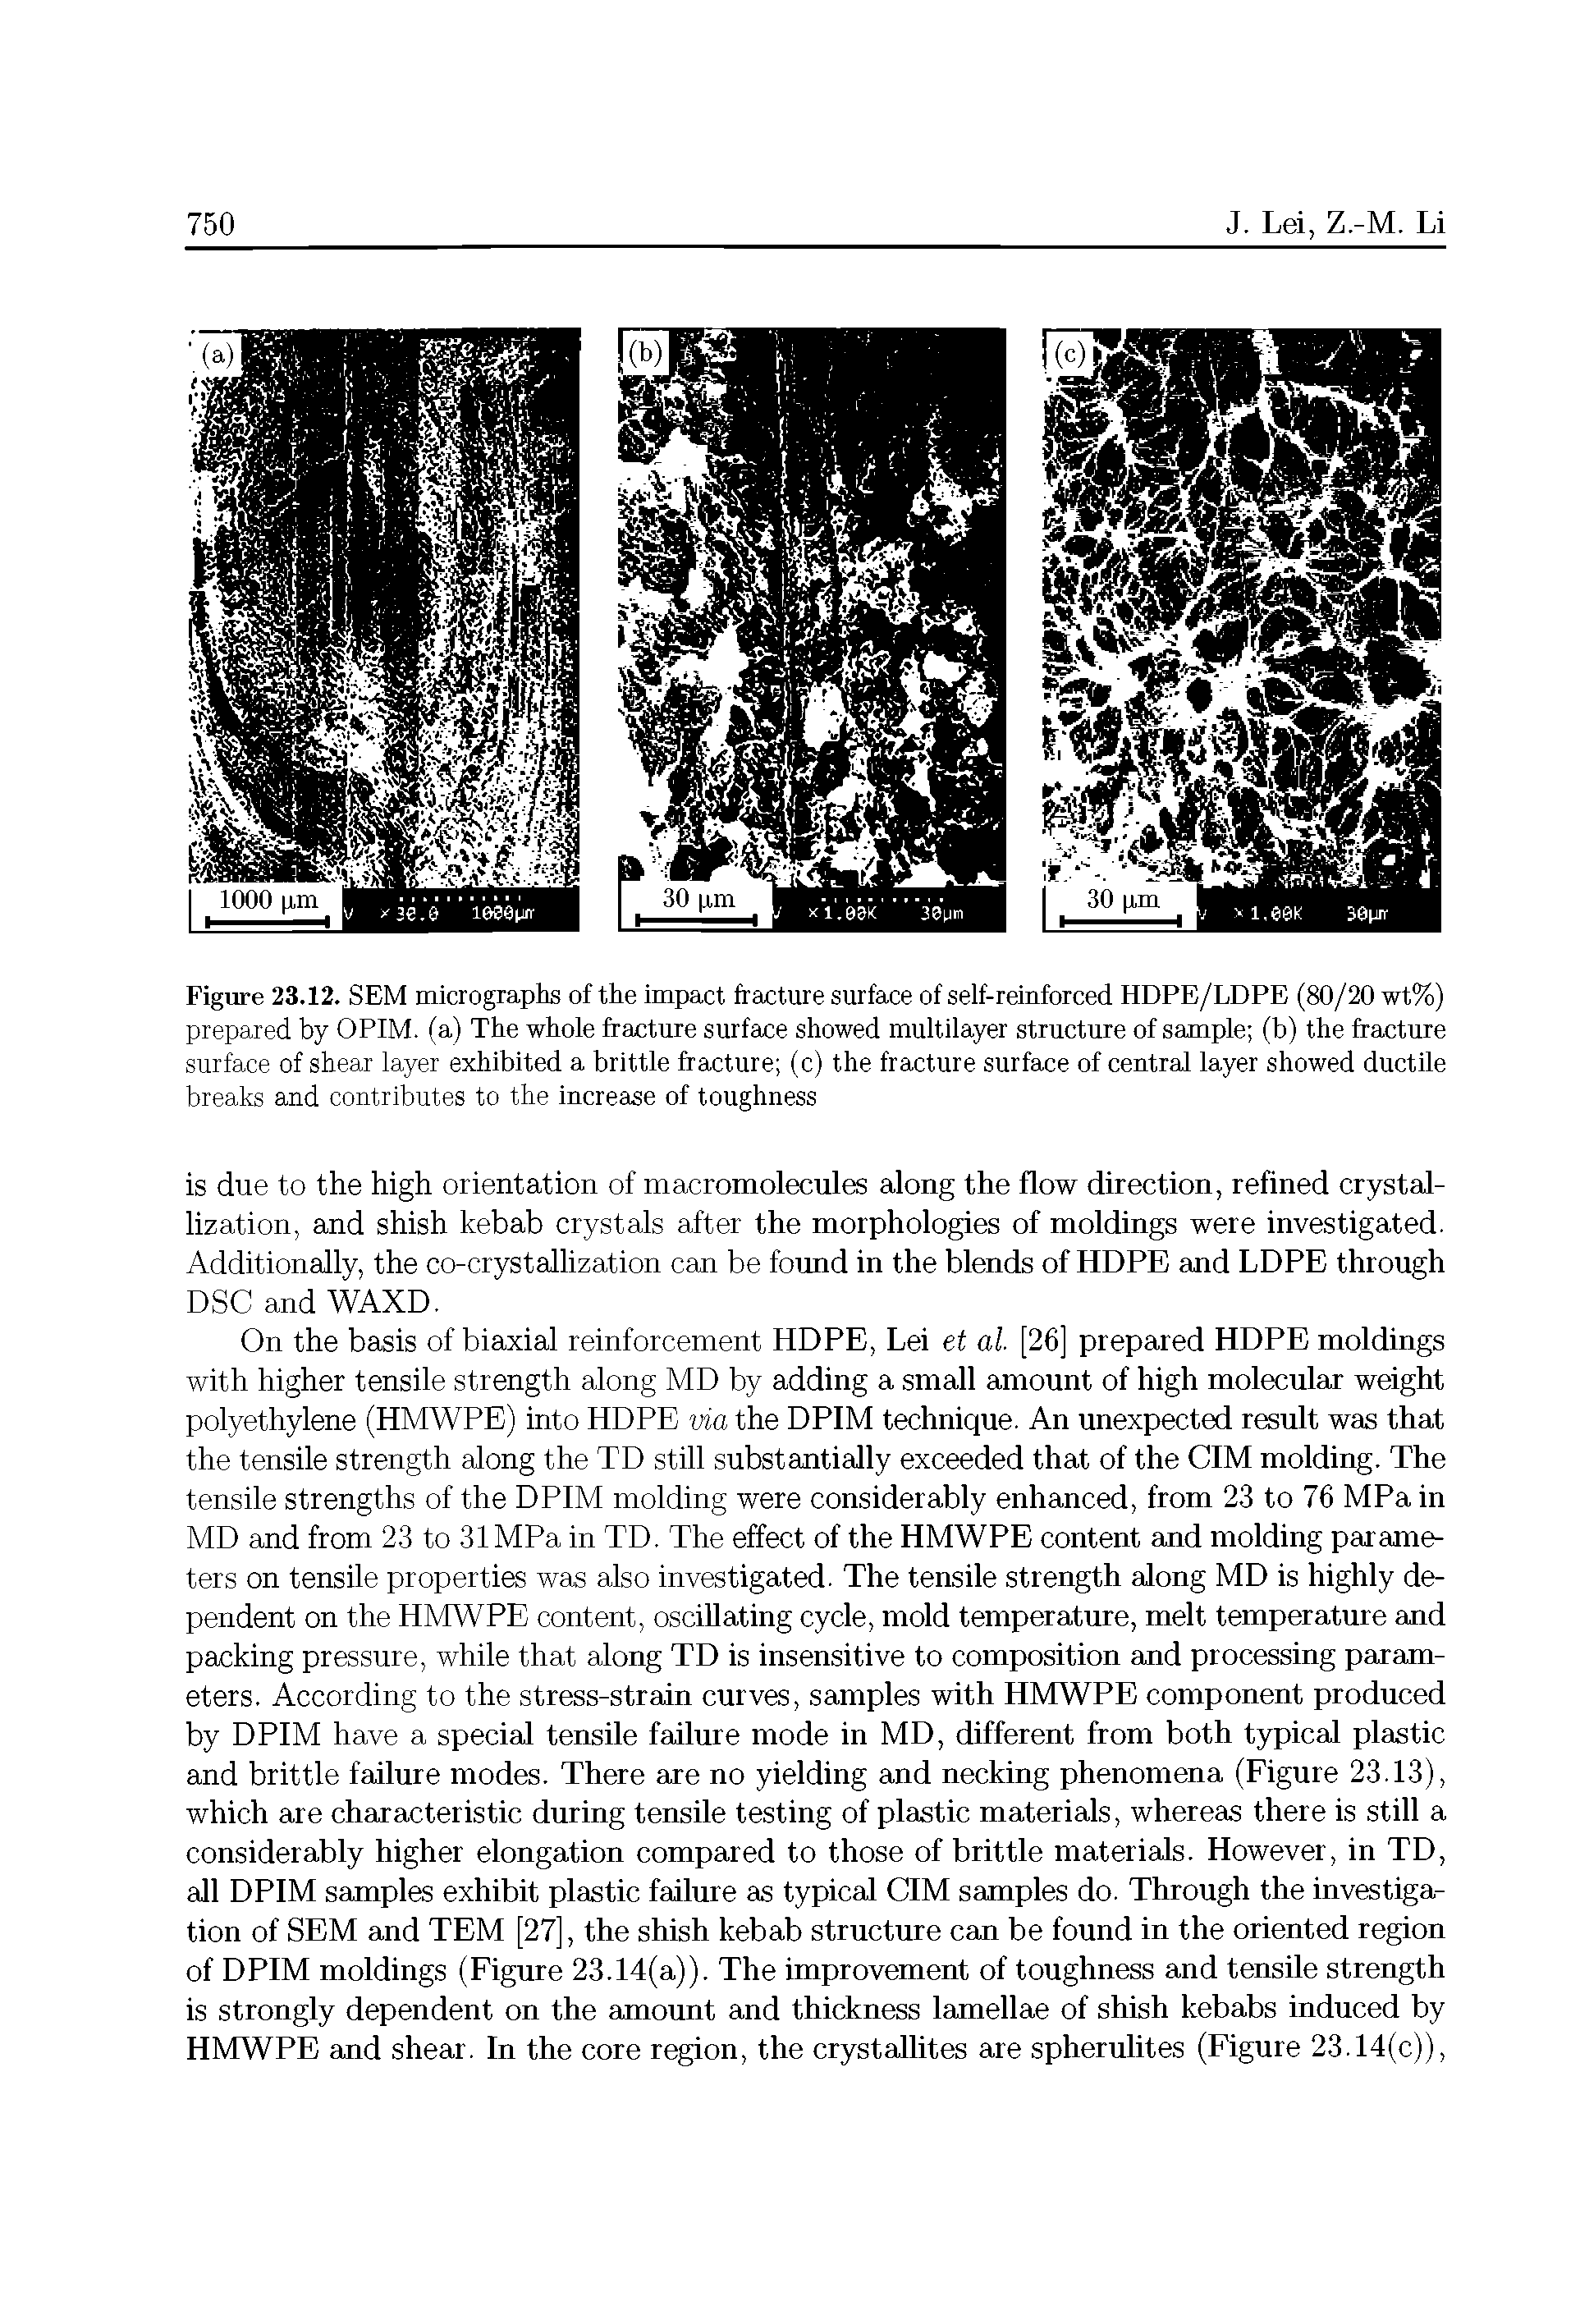 Figure 23.12. SEM micrographs of the impact fracture surface of self-reinforced HDPE/LDPE (80/20 wt%) prepared by OPIM. (a) The whole fracture surface showed multilayer structure of sample (b) the fracture surface of shear layer exhibited a brittle fracture (c) the fracture surface of central layer showed ductile breaks and contributes to the increase of toughness...